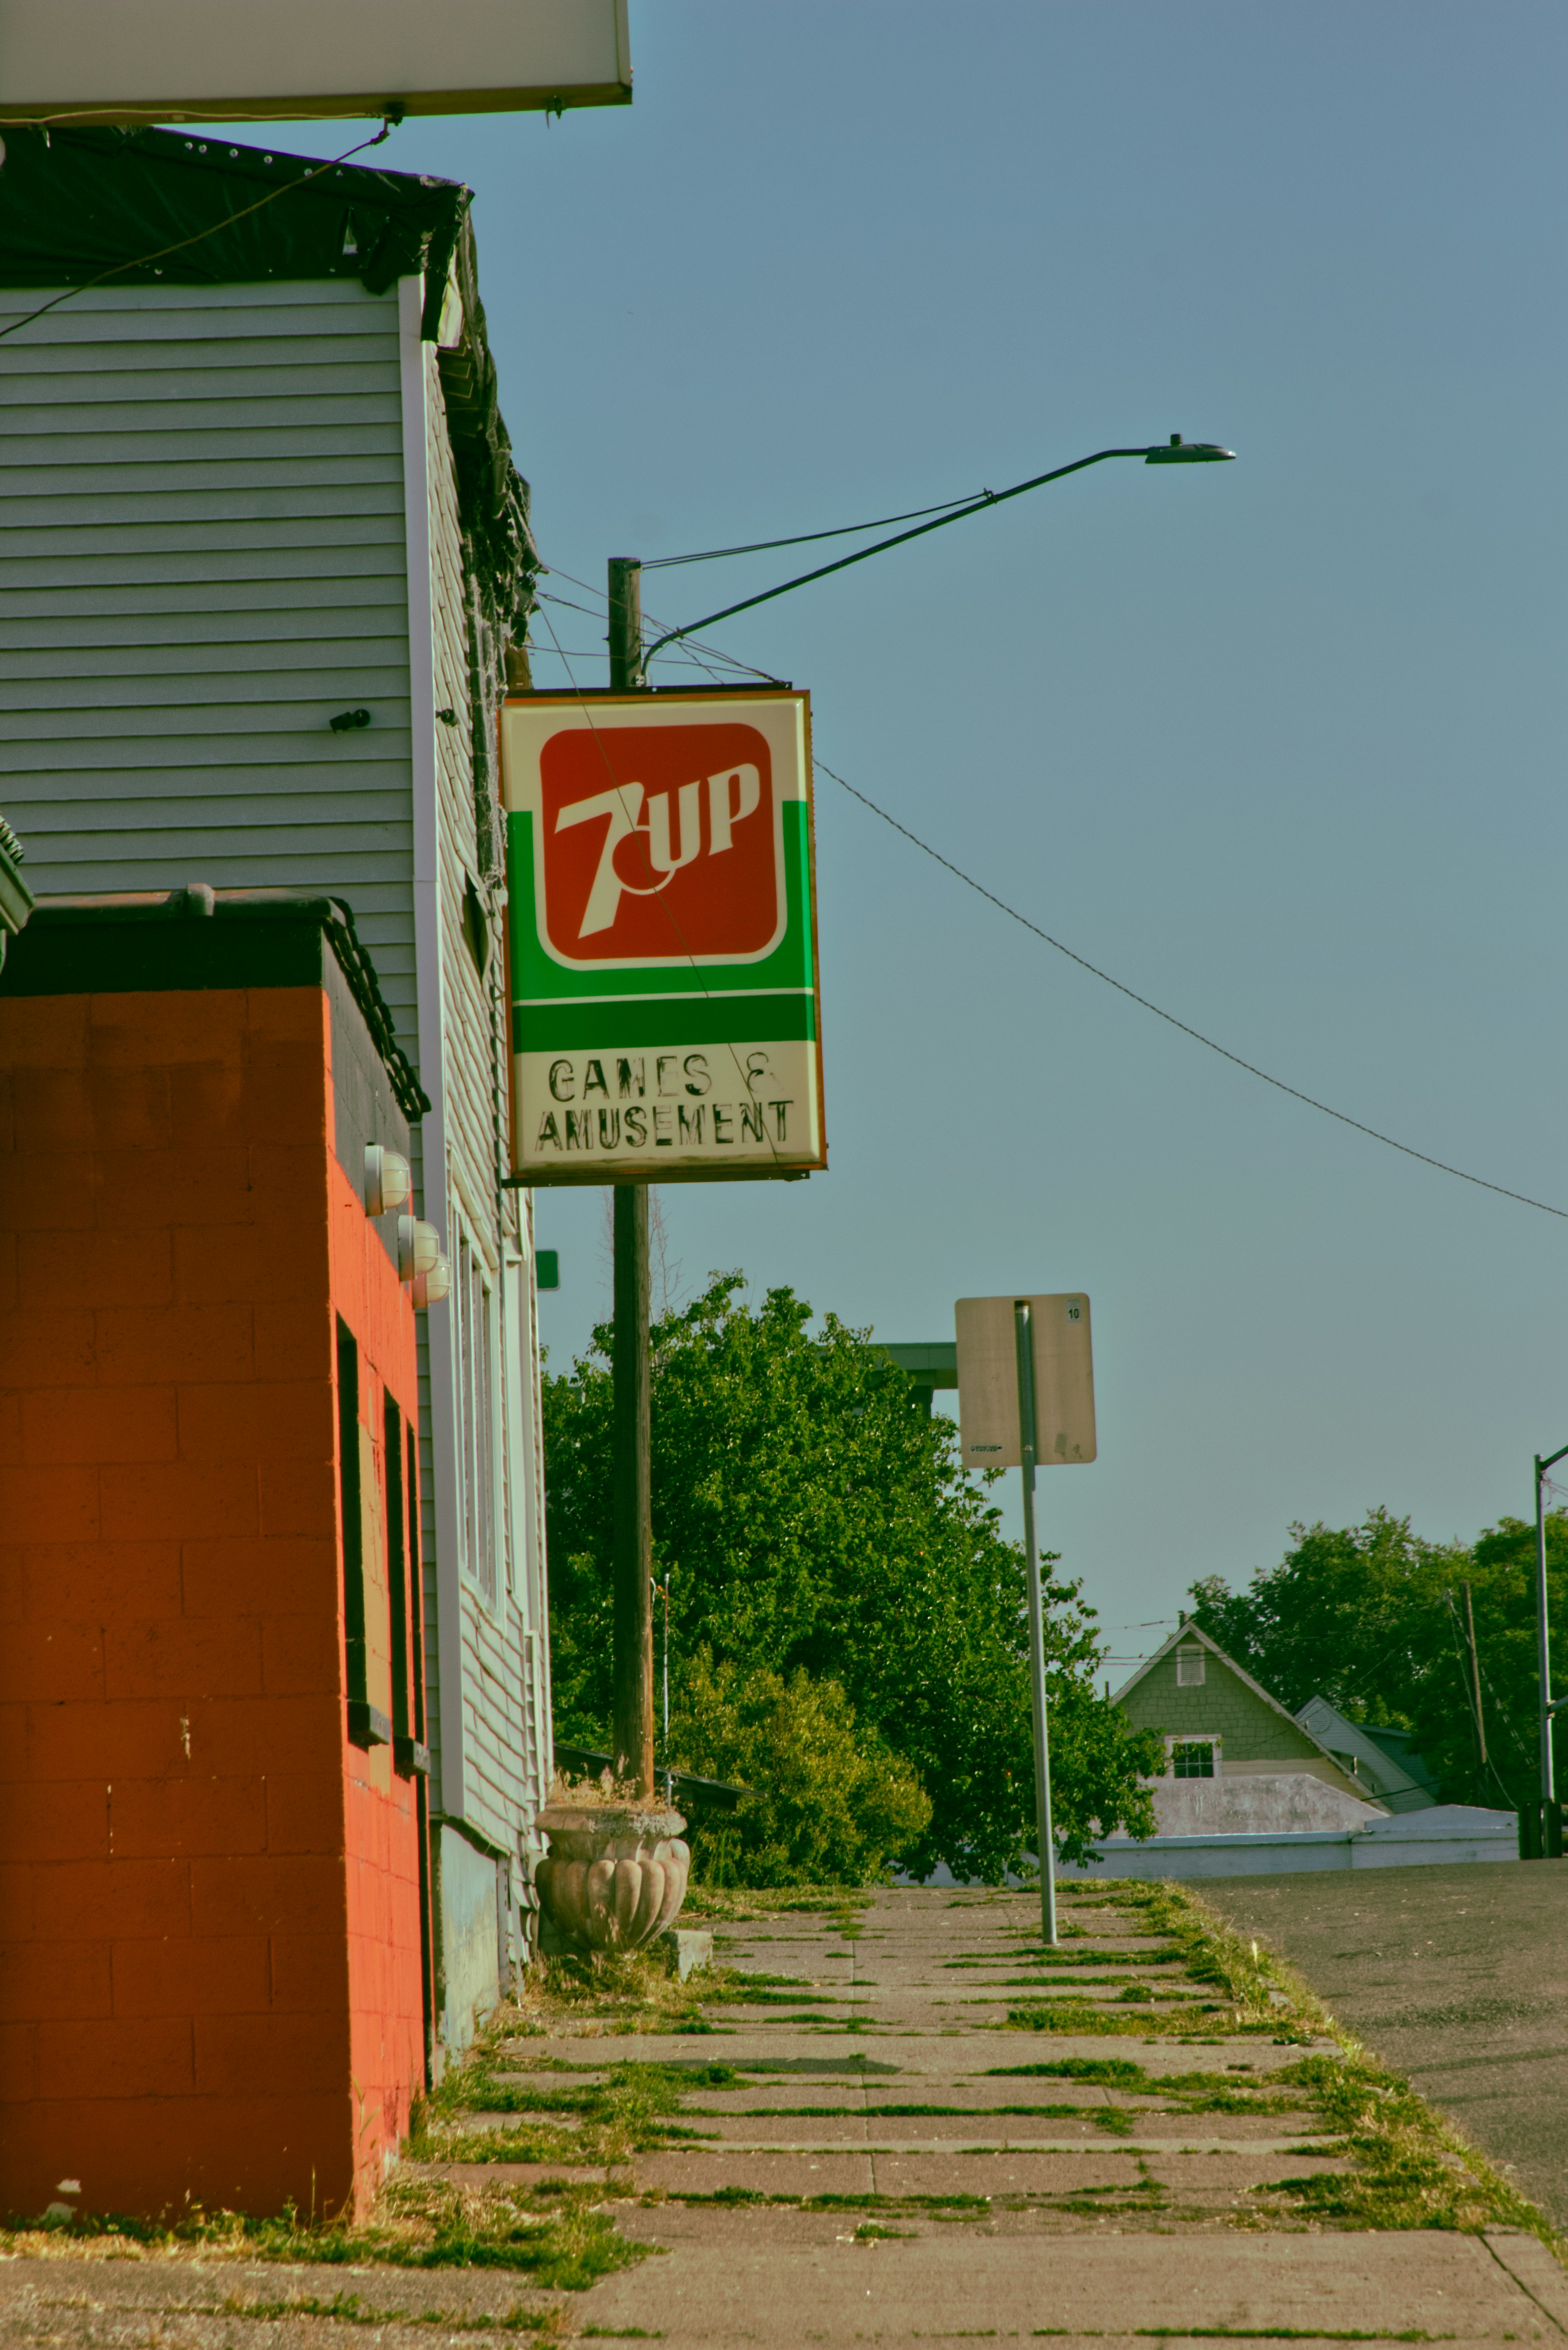 old 7up sign on the street.